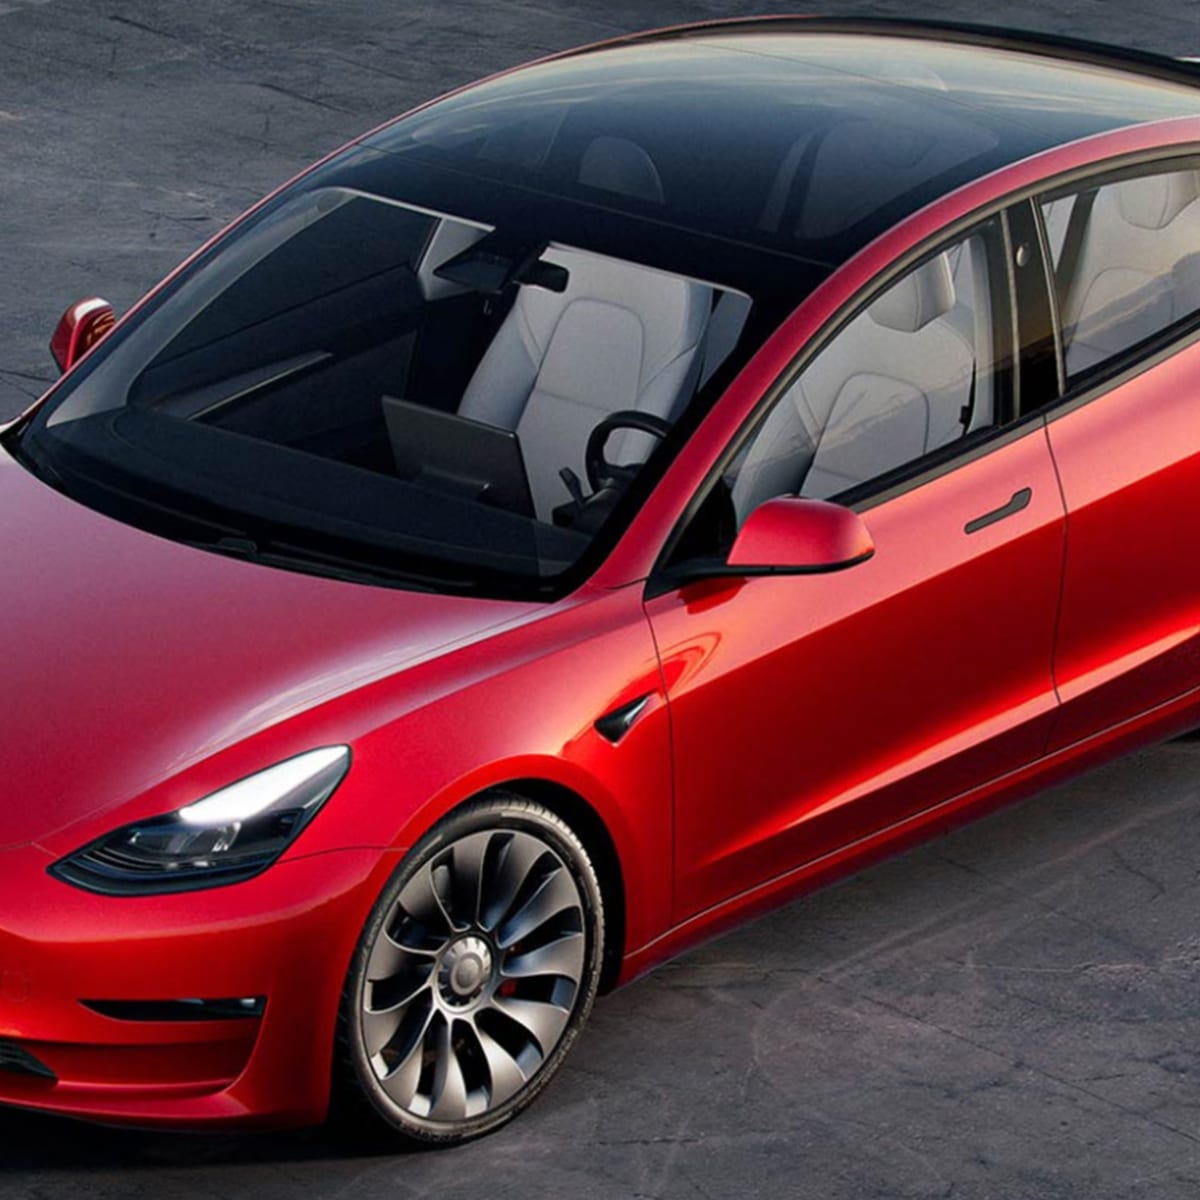 New Tesla Electric Car Testing To Start This Year - Could Be Named